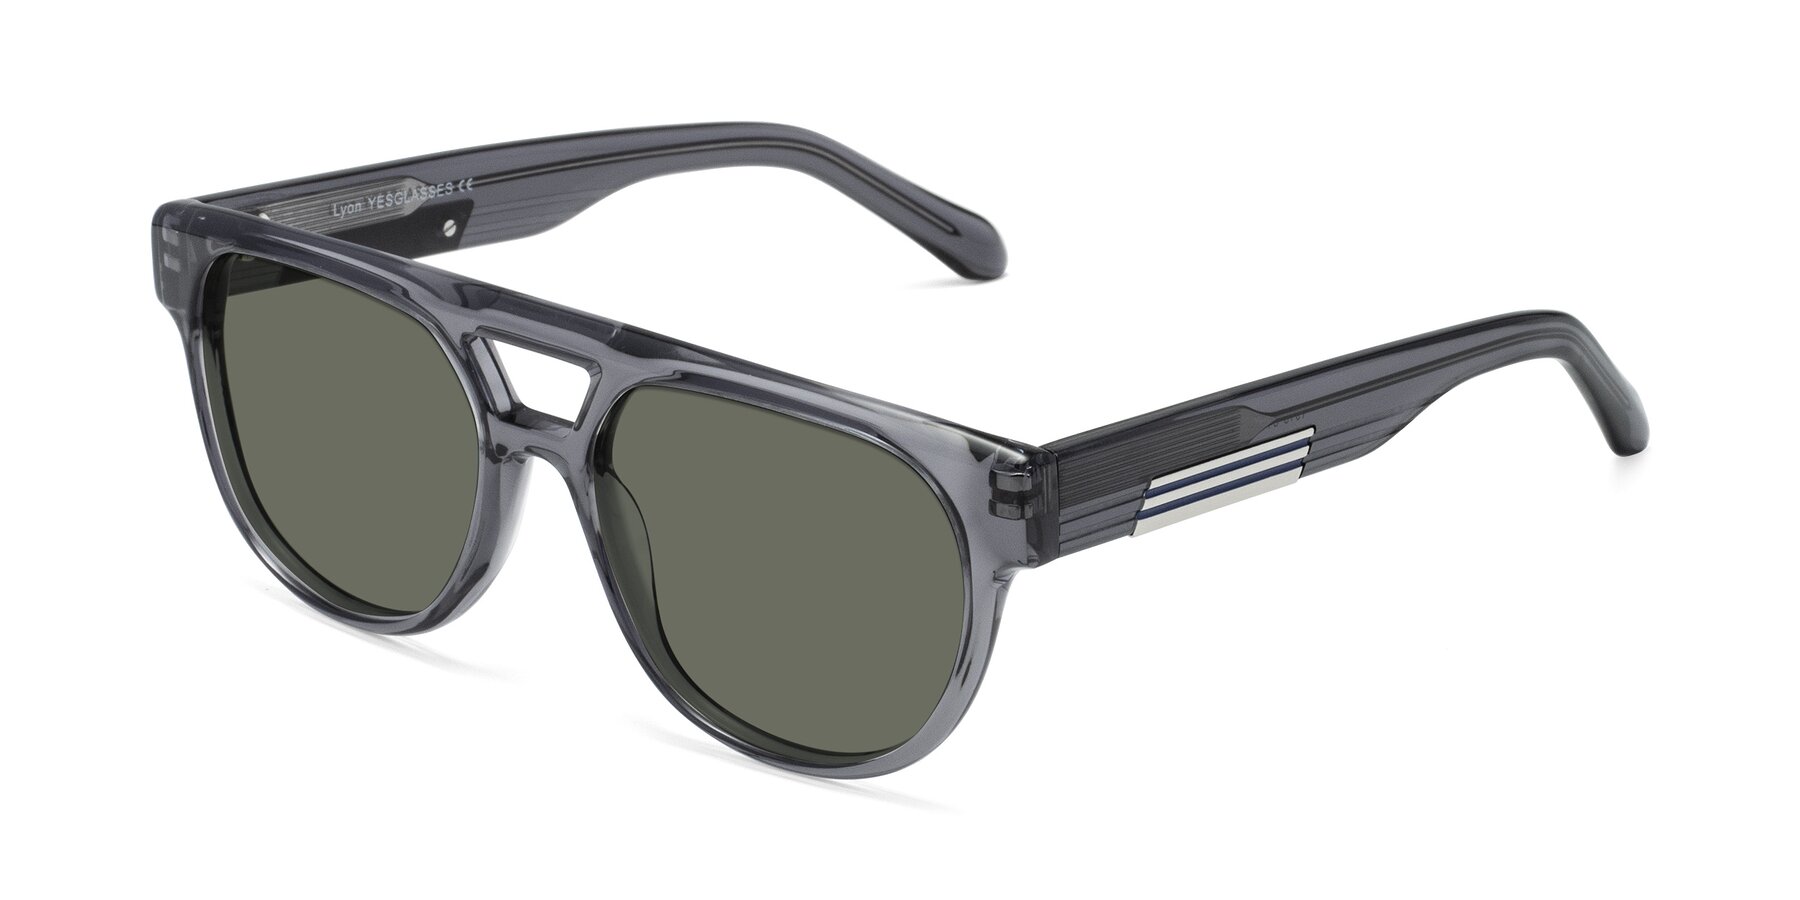 Angle of Lyon in Dim Gray with Gray Polarized Lenses